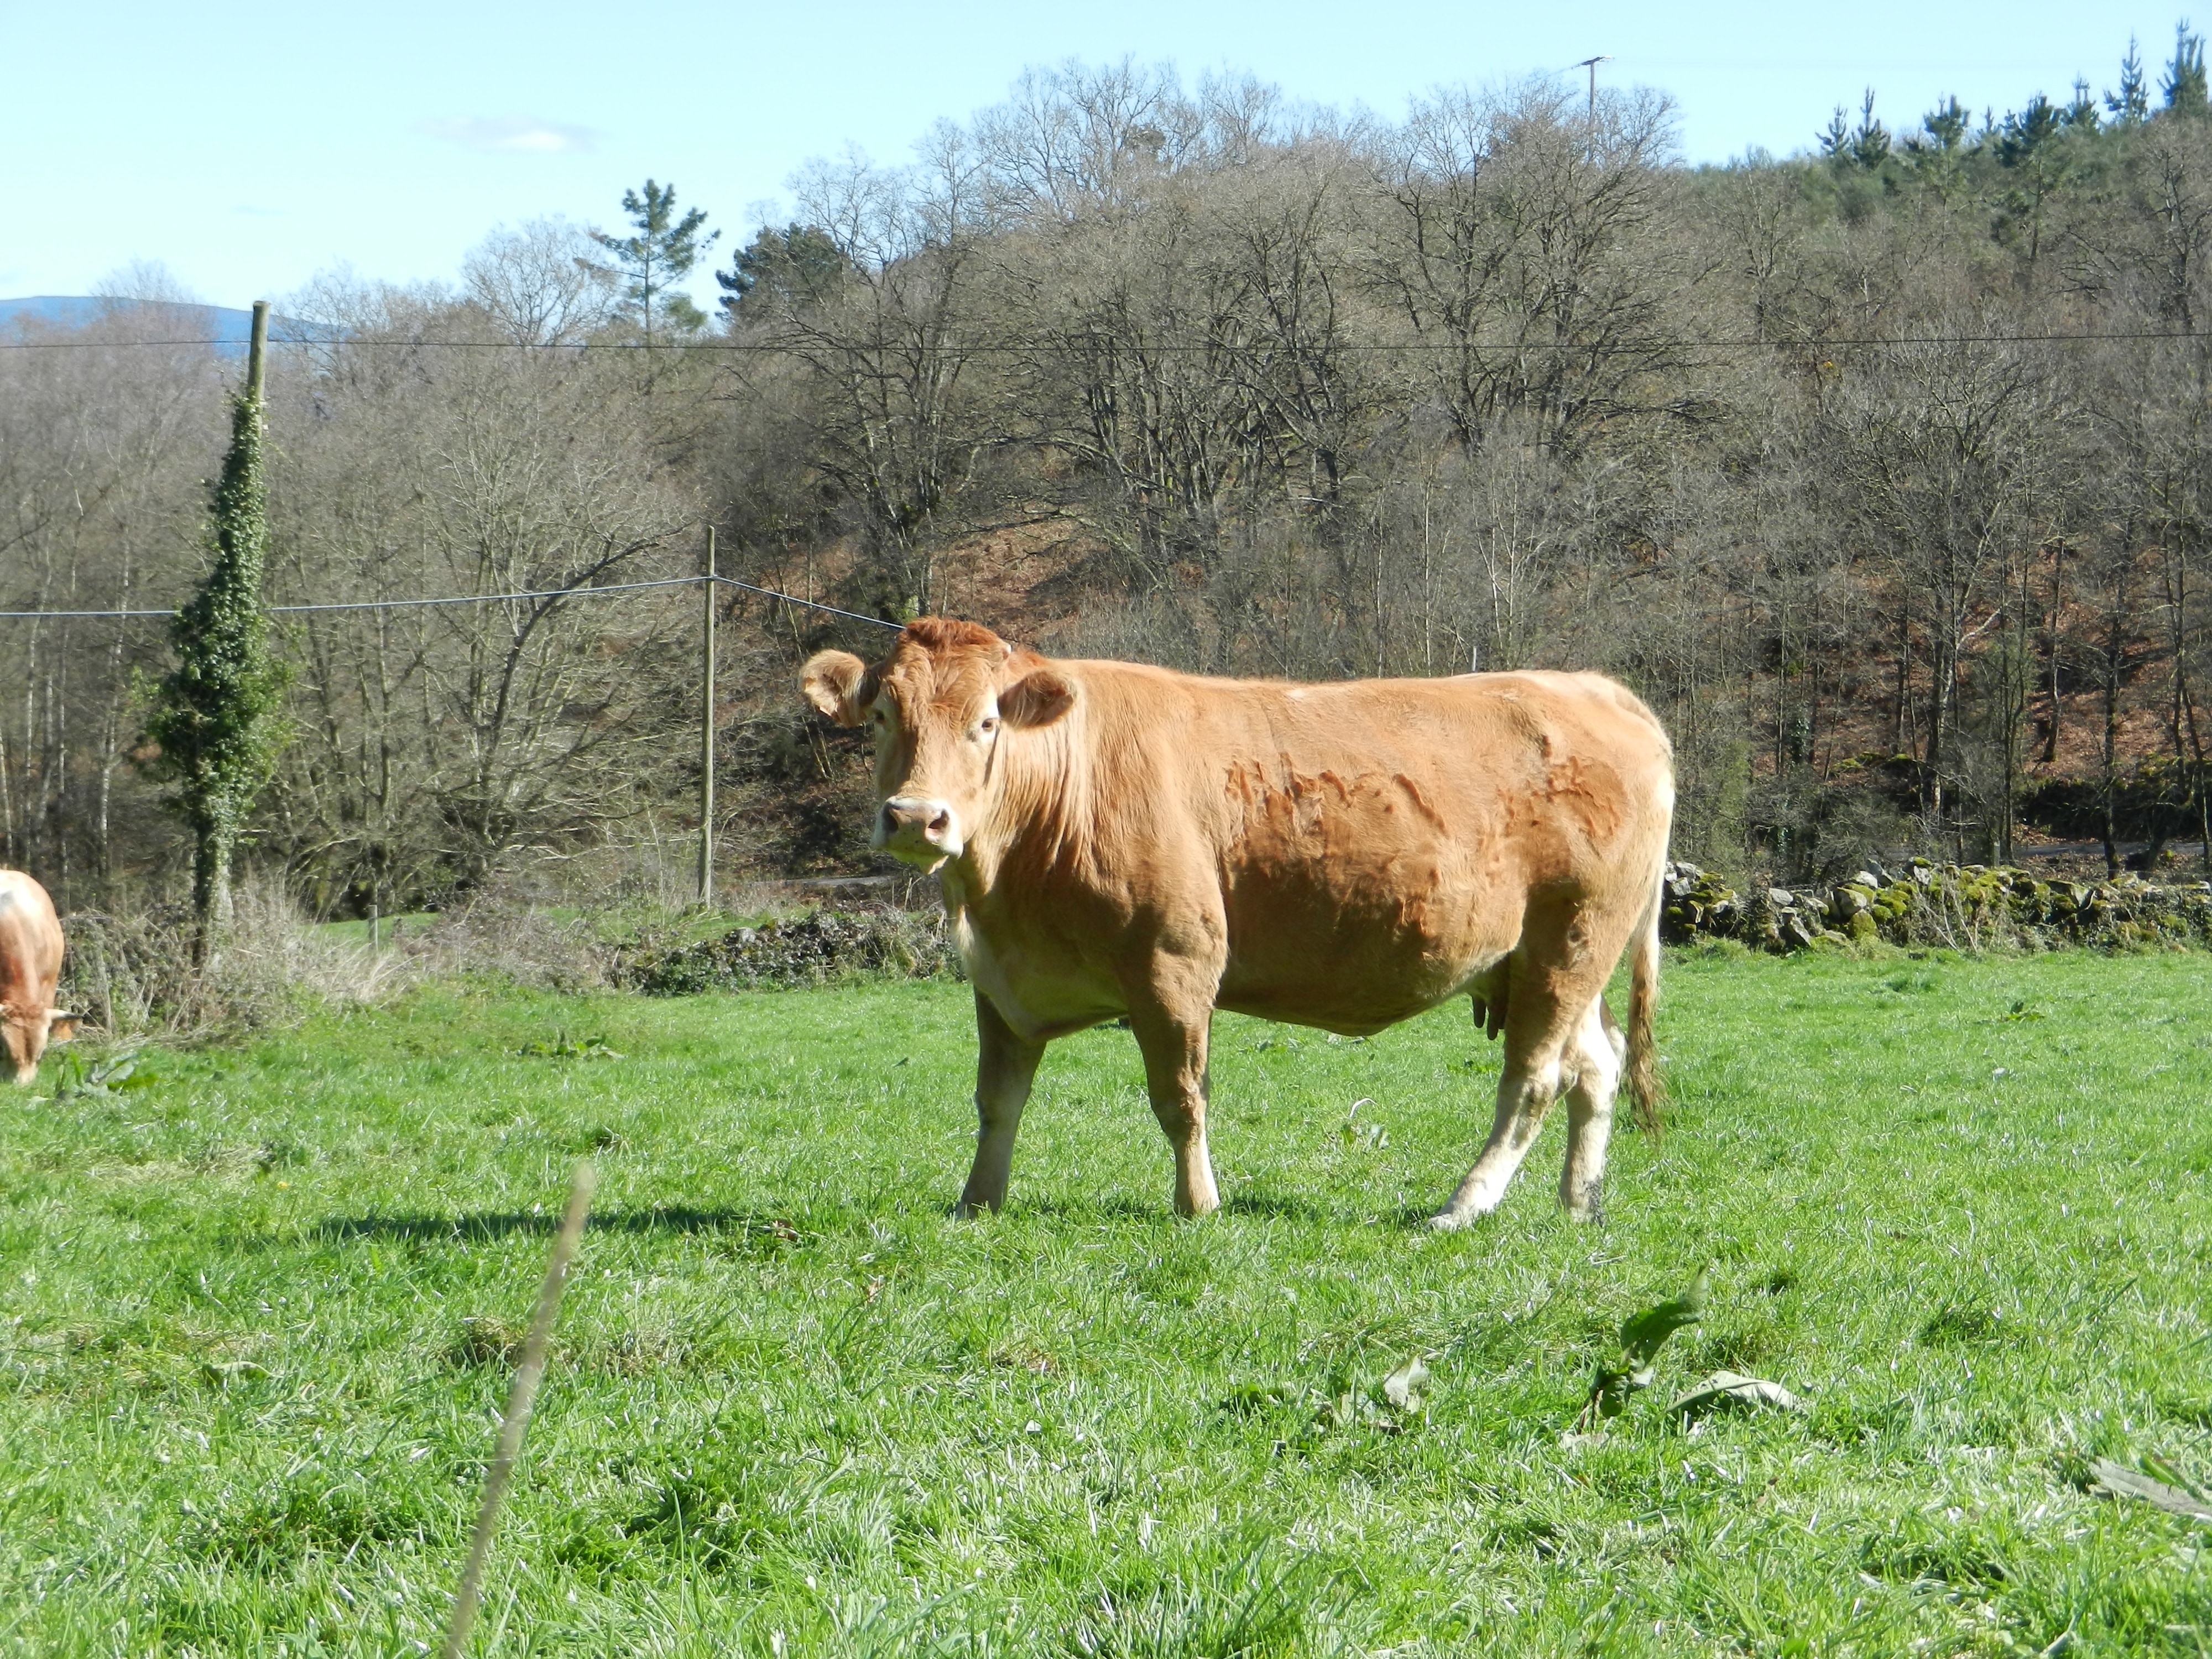 brown and white short coated cow in grass land during daytime